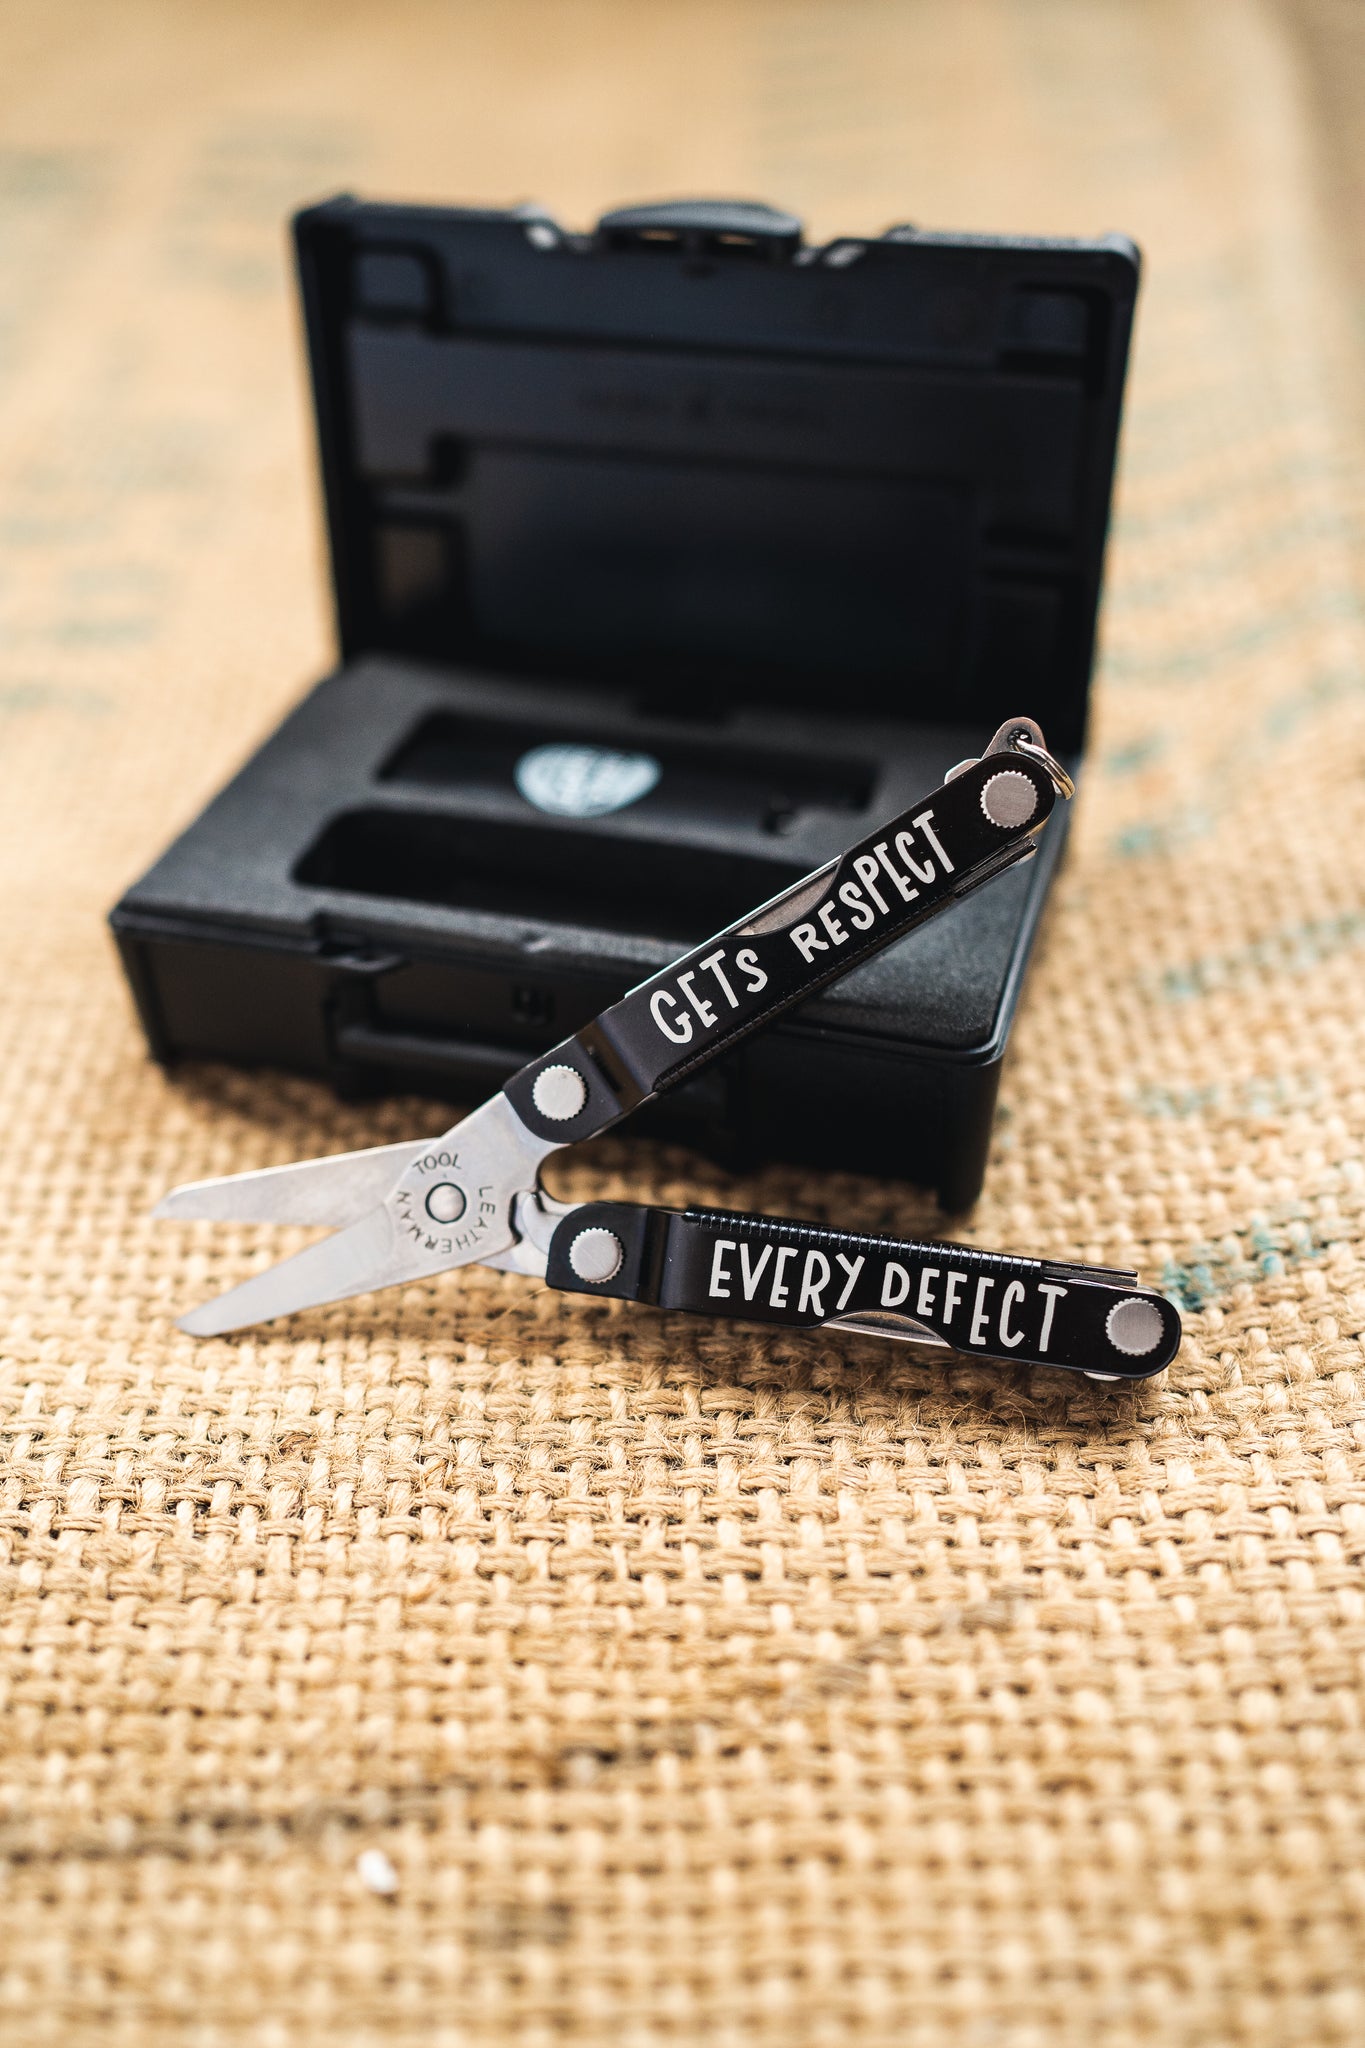 EVERY DEFECT GETS RESPECT Leatherman